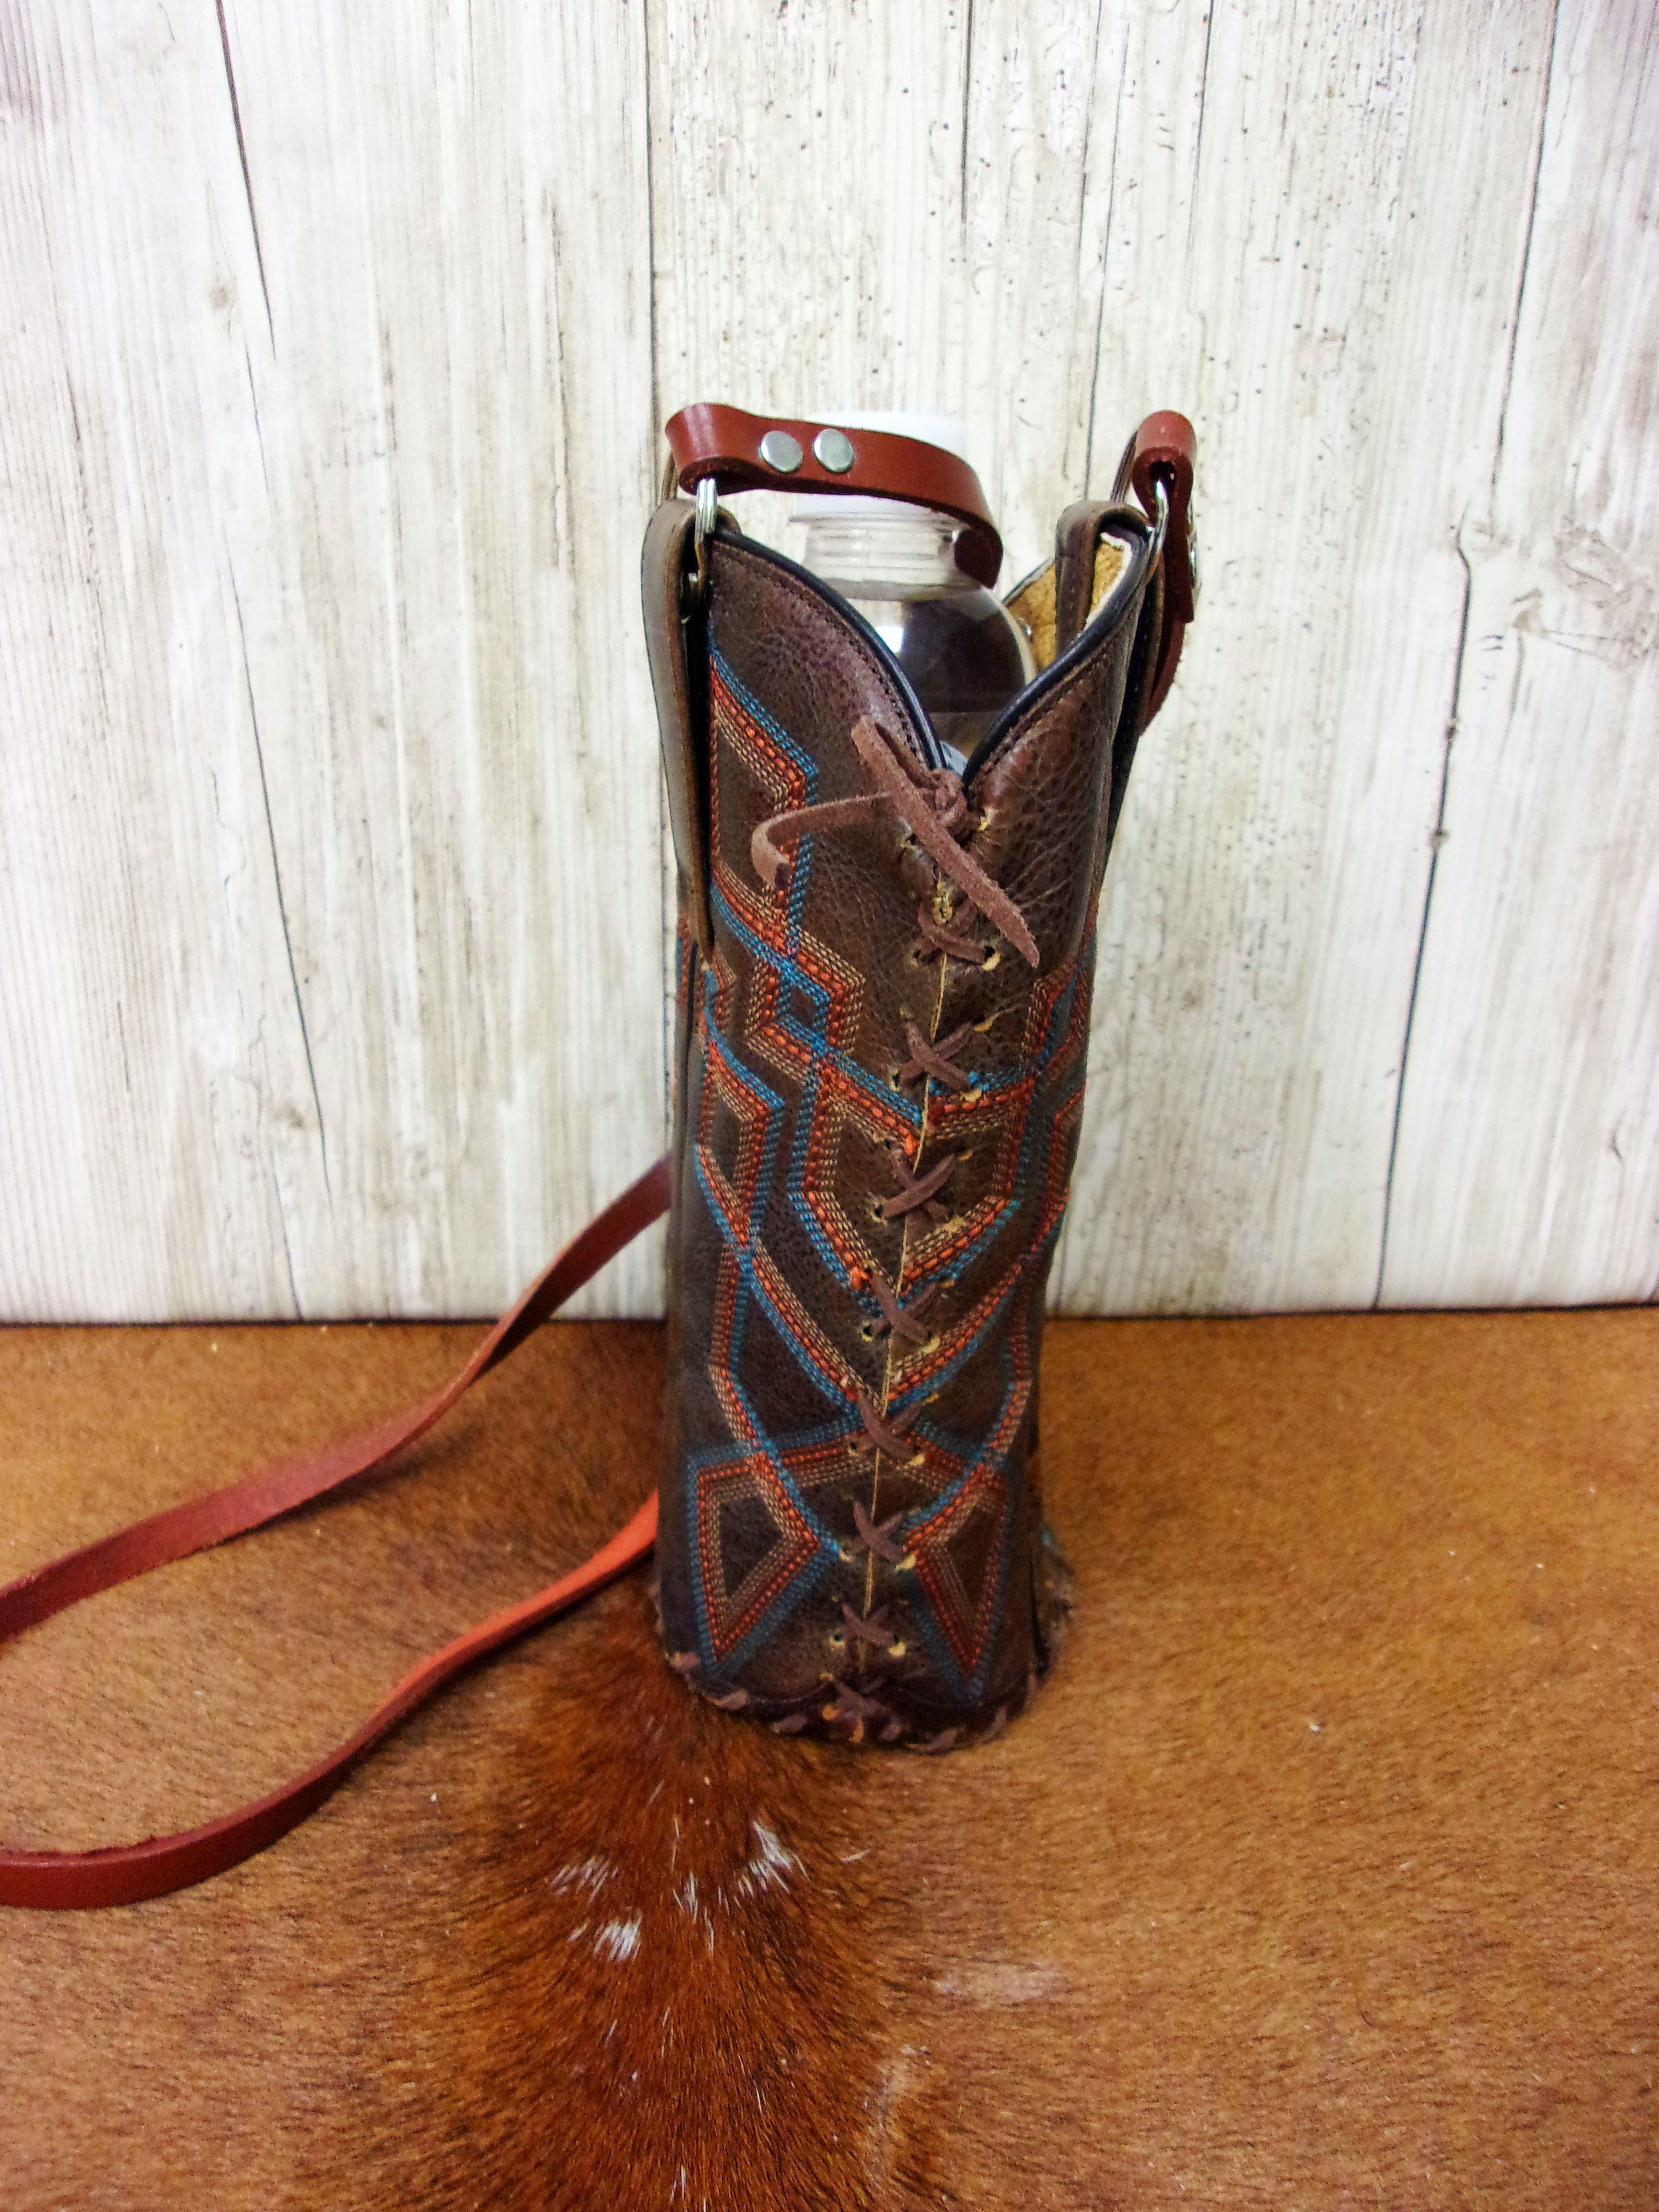 Cowboy Boot Water Bottle Tote - Bottle Caddy - Leather Bottle Holder WA39 cowboy boot purses, western fringe purse, handmade leather purses, boot purse, handmade western purse, custom leather handbags Chris Thompson Bags